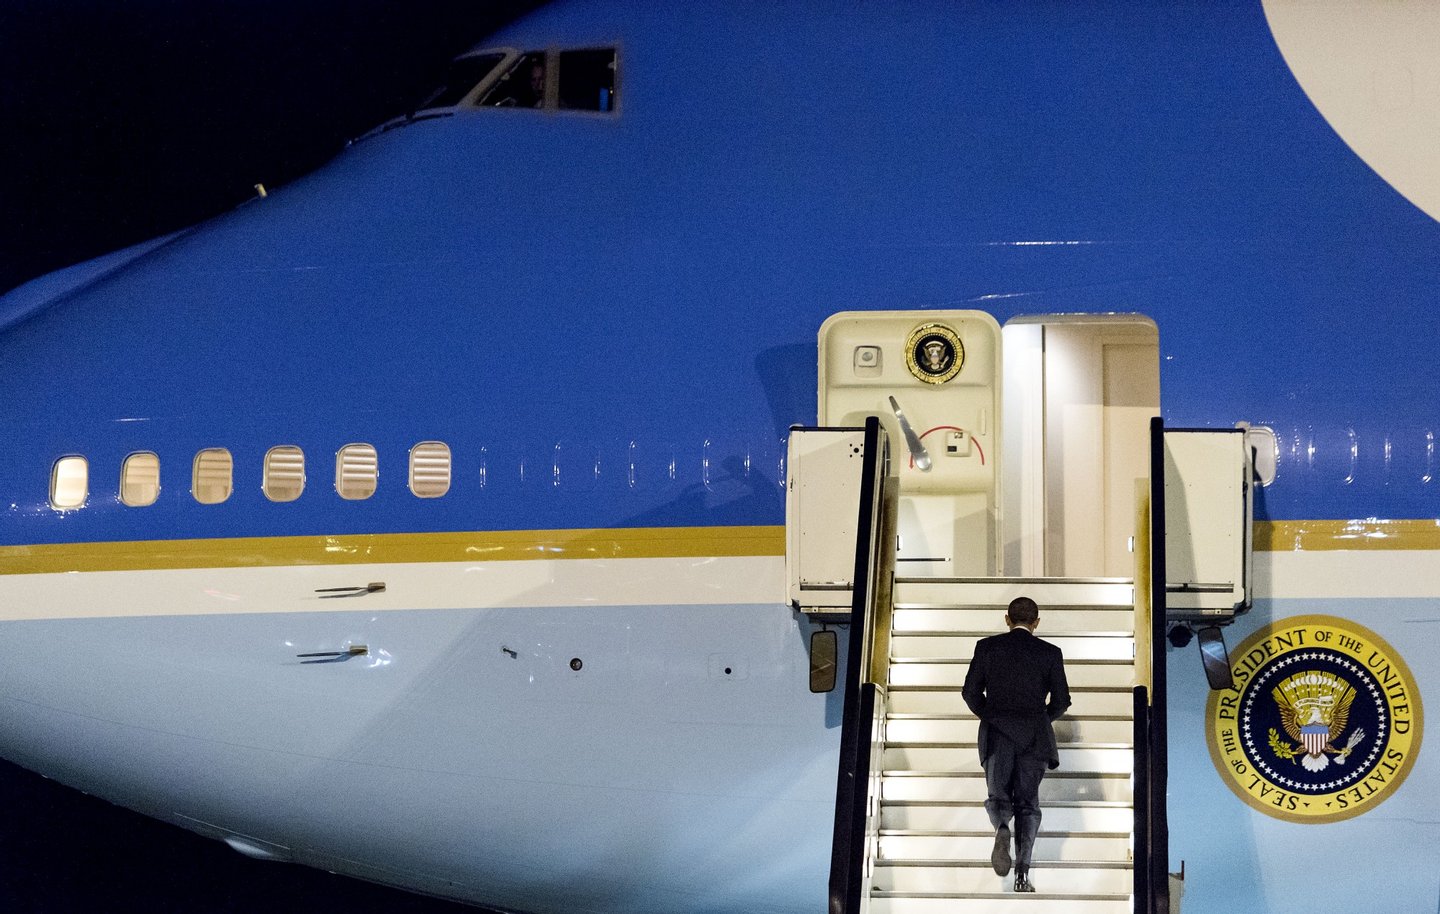 AMSTERDAM, NETHERLANDS - MARCH 25: U.S. President Barack Obama walks up the stairs of Air Force One before leaving Amsterdam Airport Schiphol March 25, 2014 in Amsterdam, Netherlands. Obama attended the two-day Nuclear Security Summit in The Hague. (Photo by Koen Van Weel-Pool/Getty Images)